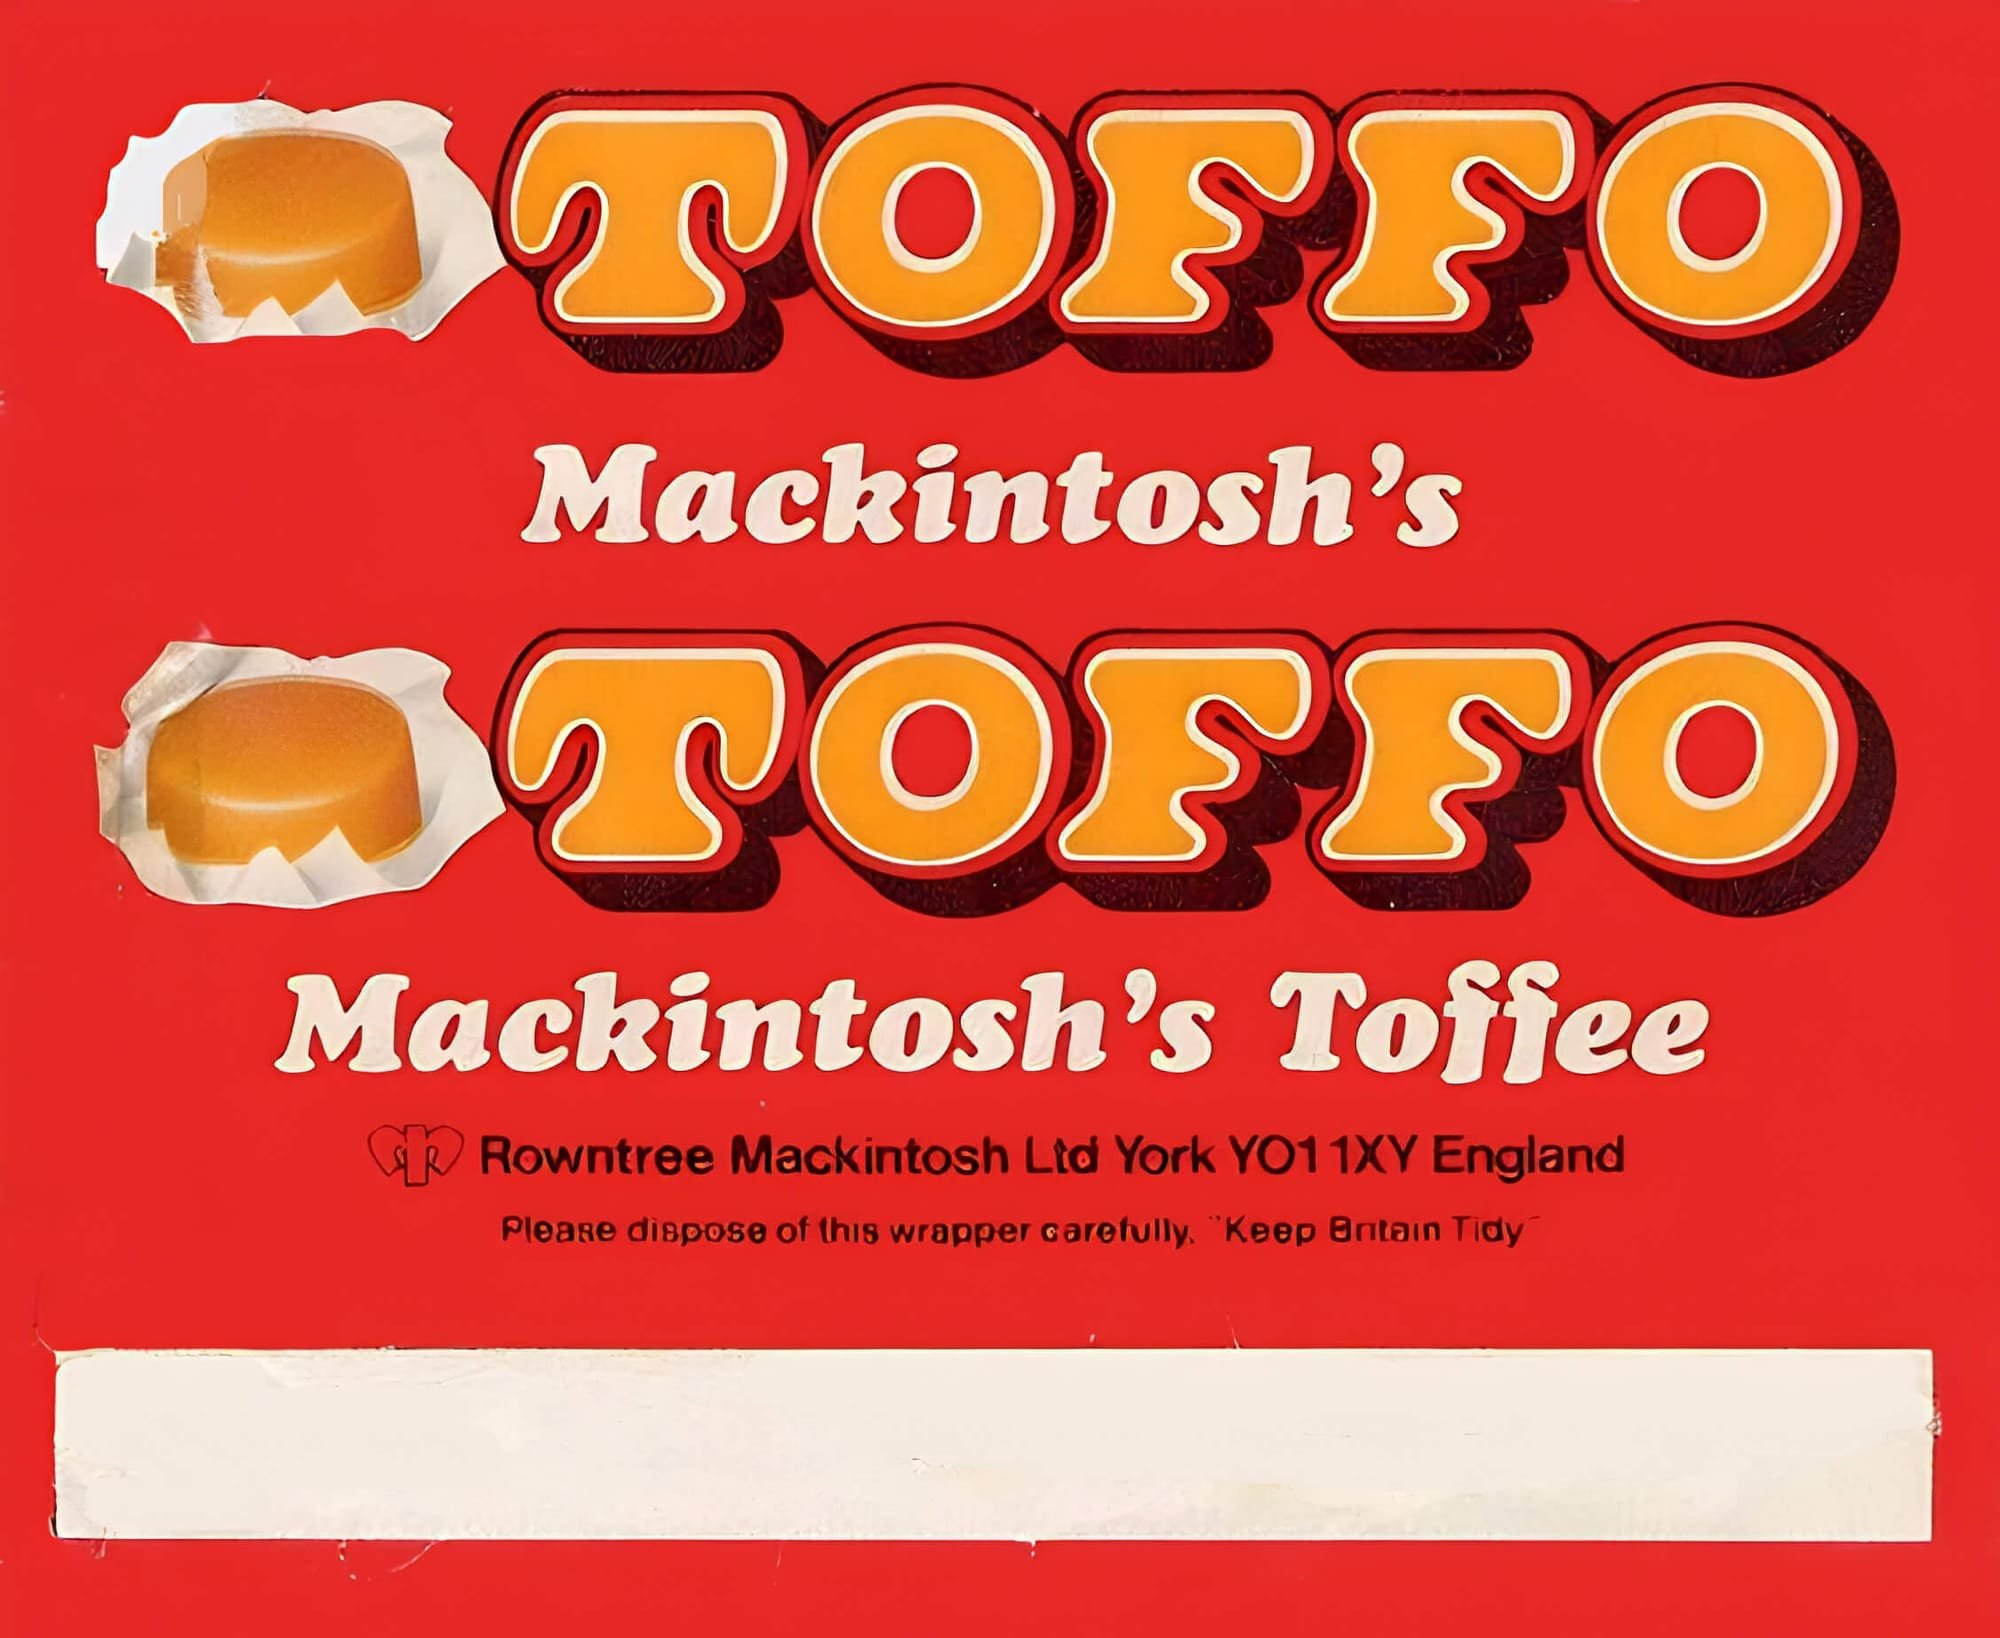 Whatever Happened to Toffo Sweets?